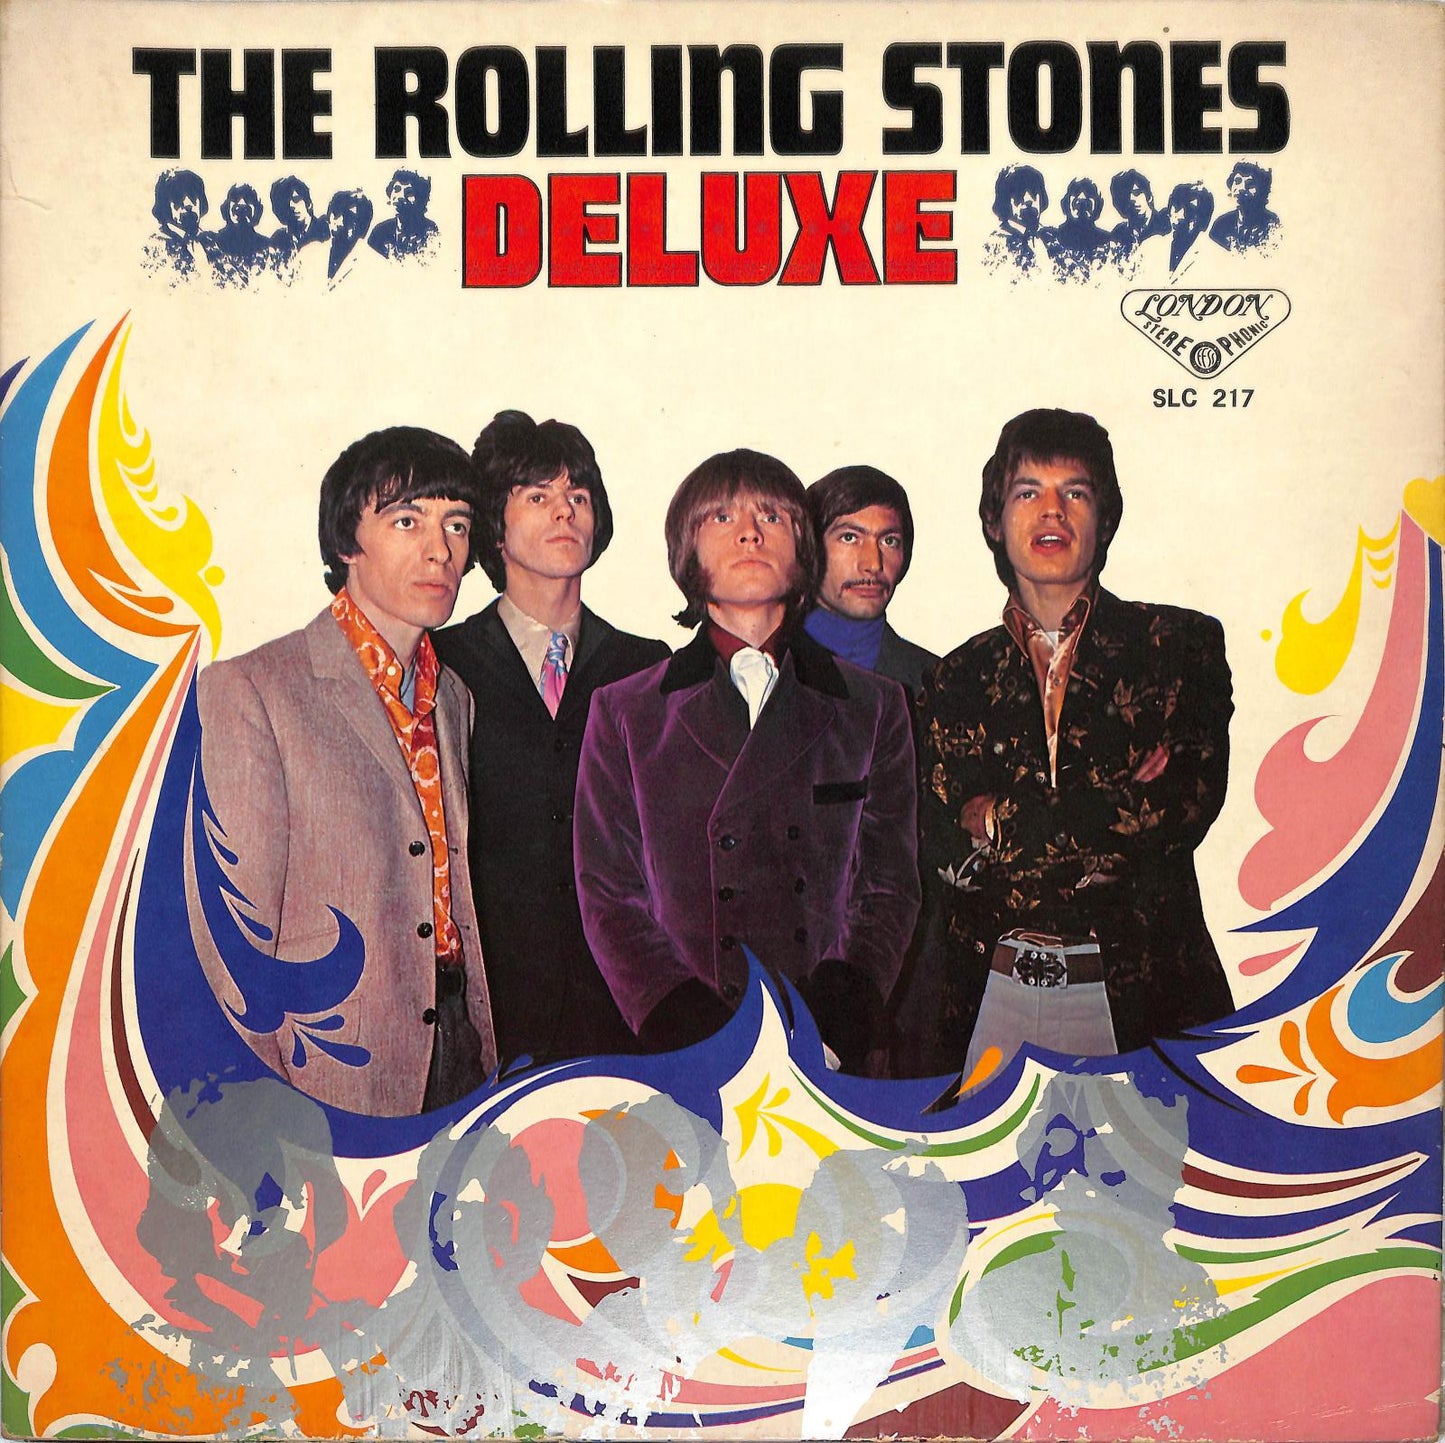 THE ROLLING STONES - Deluxe